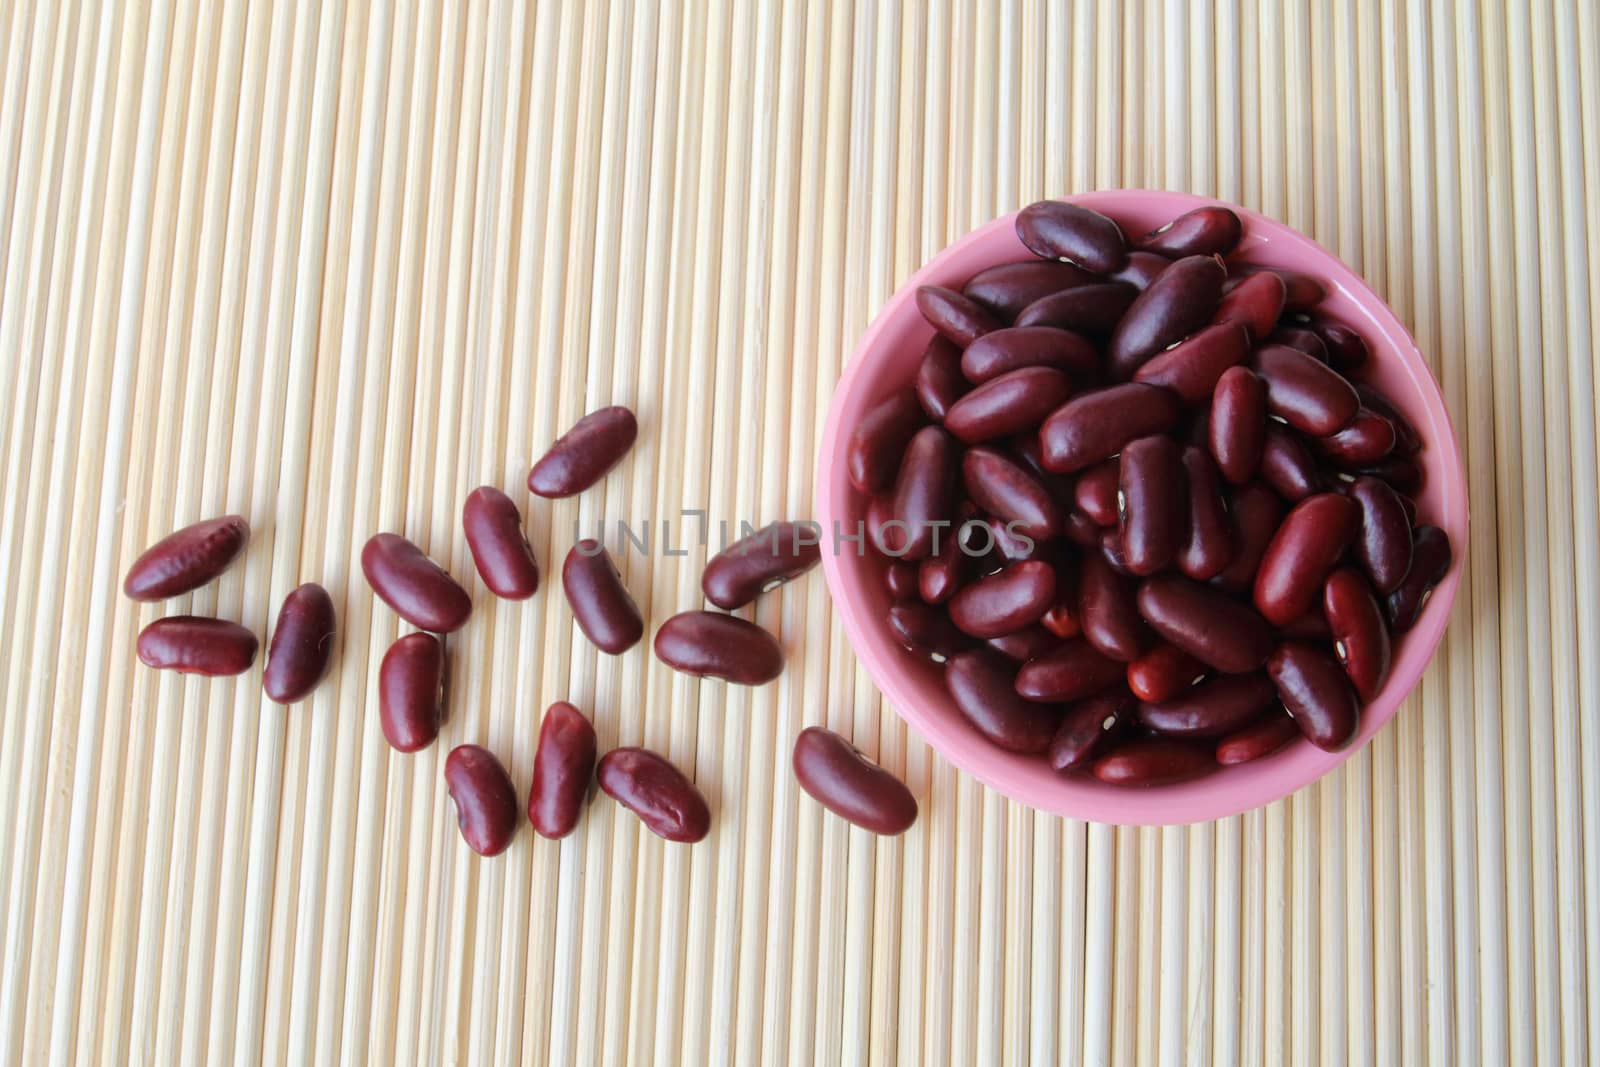 Some kidney bean are in the small bowl.